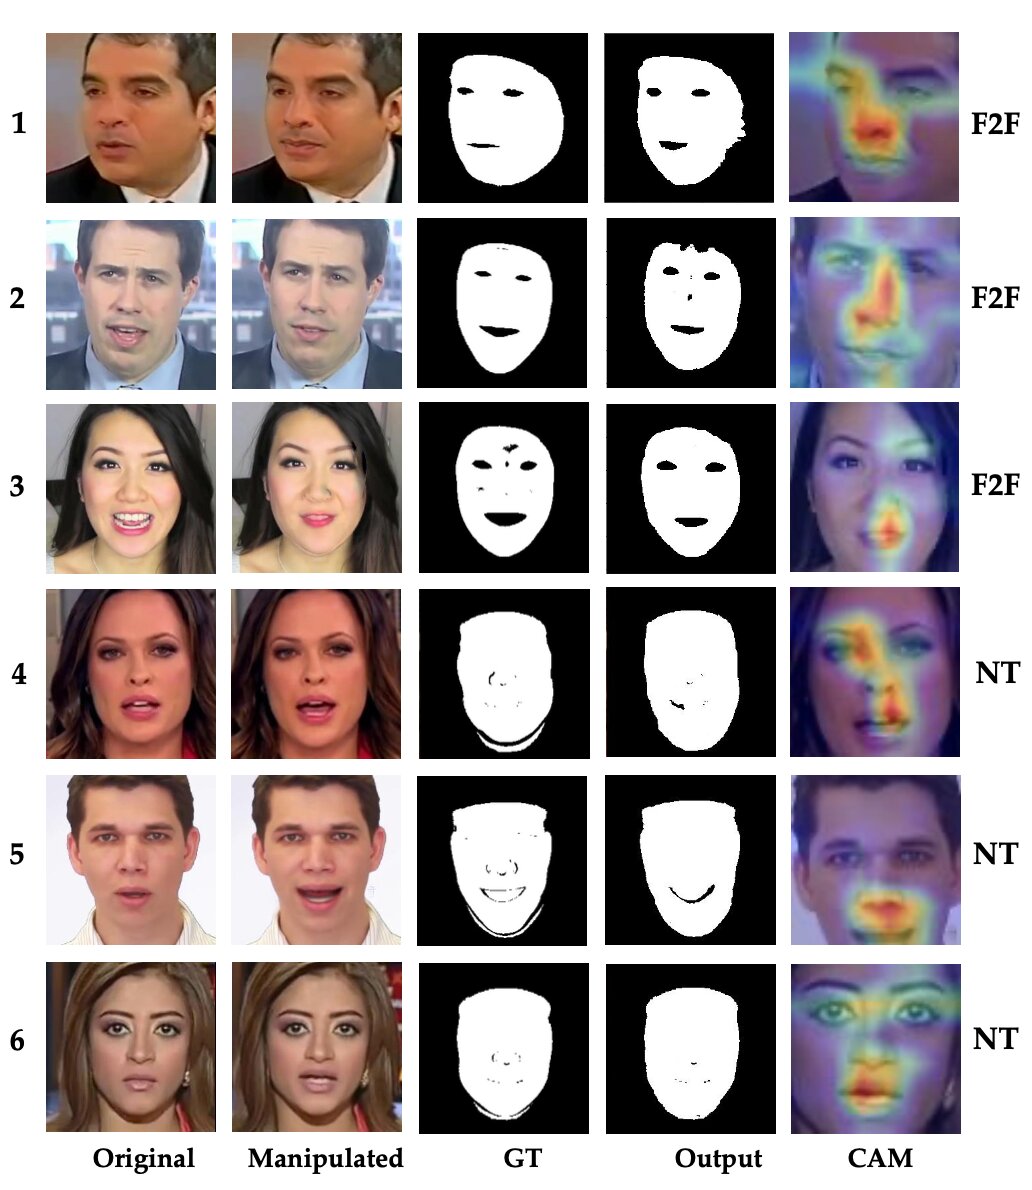 First and second columns show the original im- ages and manipulated ones respectively. The black and white images in the third column are corresponding bi- nary GT masks. Predicted masks (column 4) and generated CAMs (column 5) for manipulated images from Face2Face (row 1,2,3) and Neural-Textures (row 4,5,6) dataset. (Mazaheri & Roy-Chowdhury, 2022)